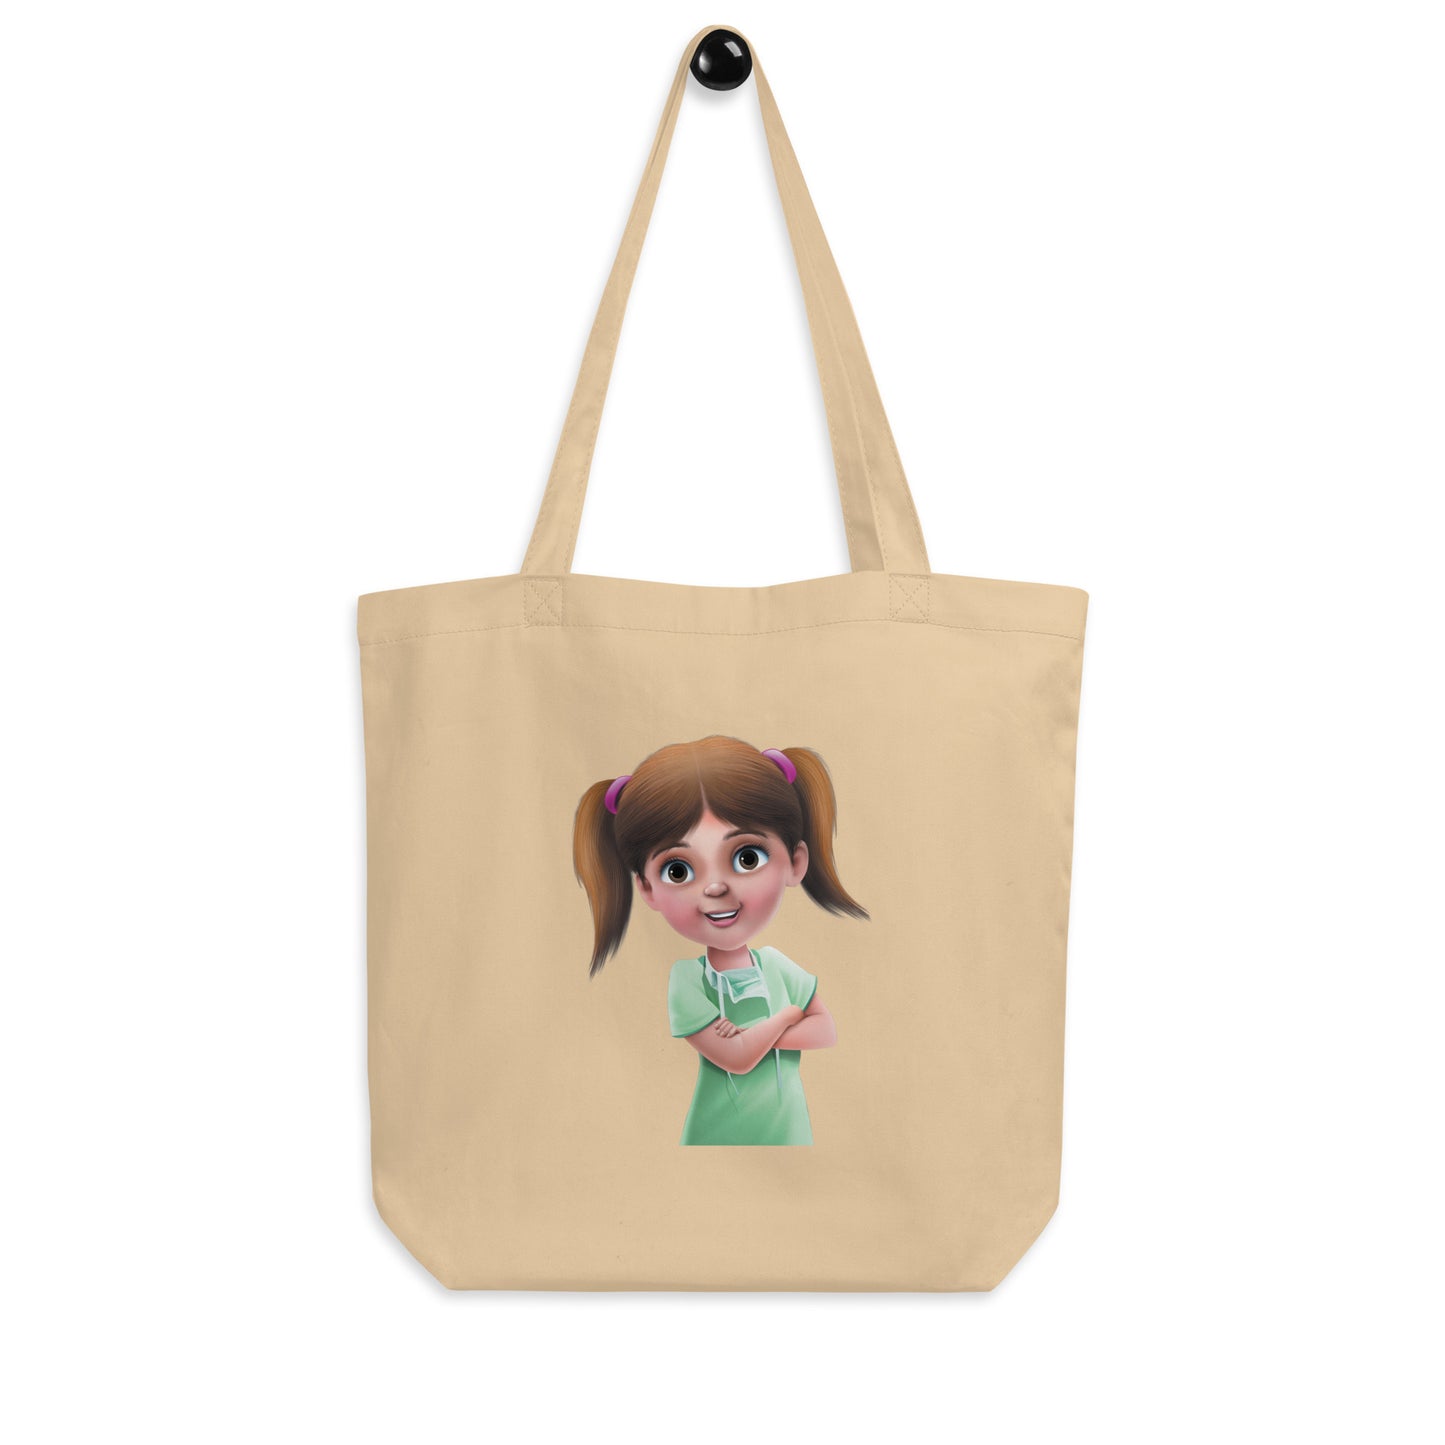 The best, cute, fun organic cotton tote bag for a doctor or future surgeon.